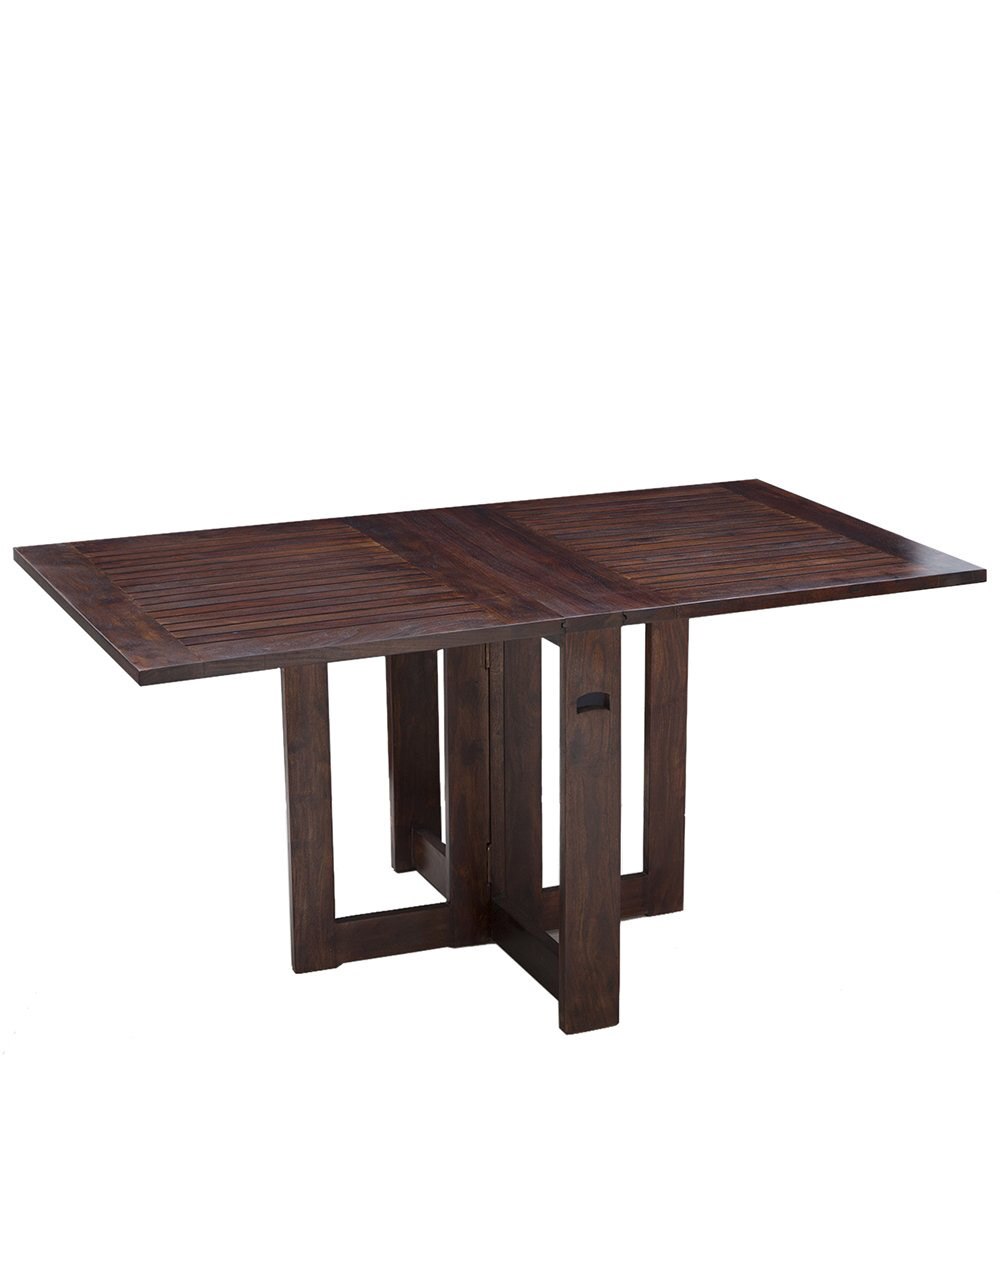 Brown Wood Dining Table 6 Seater